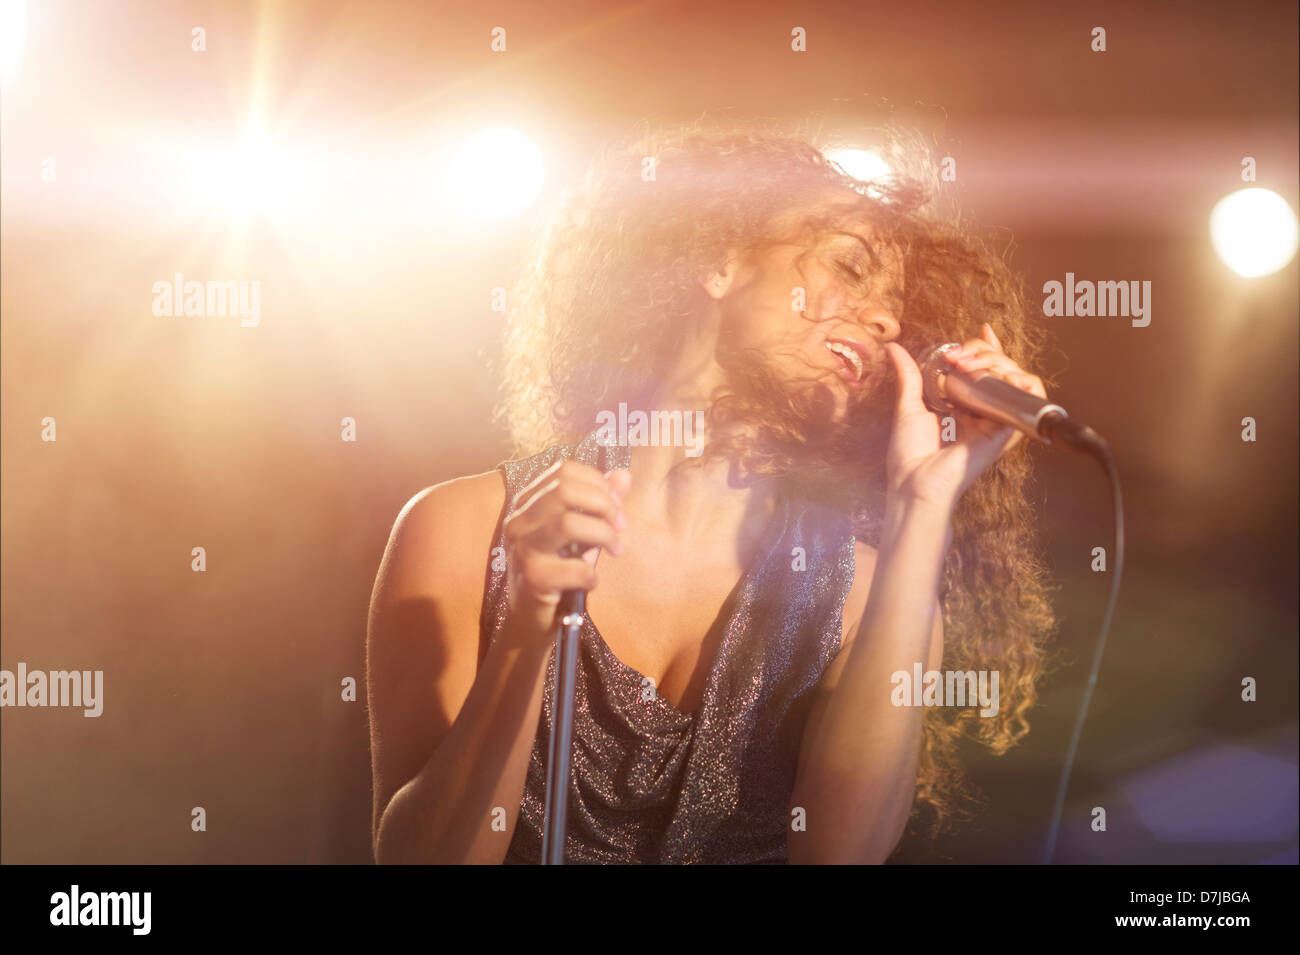 Young woman singing in spotlight Stock Photo